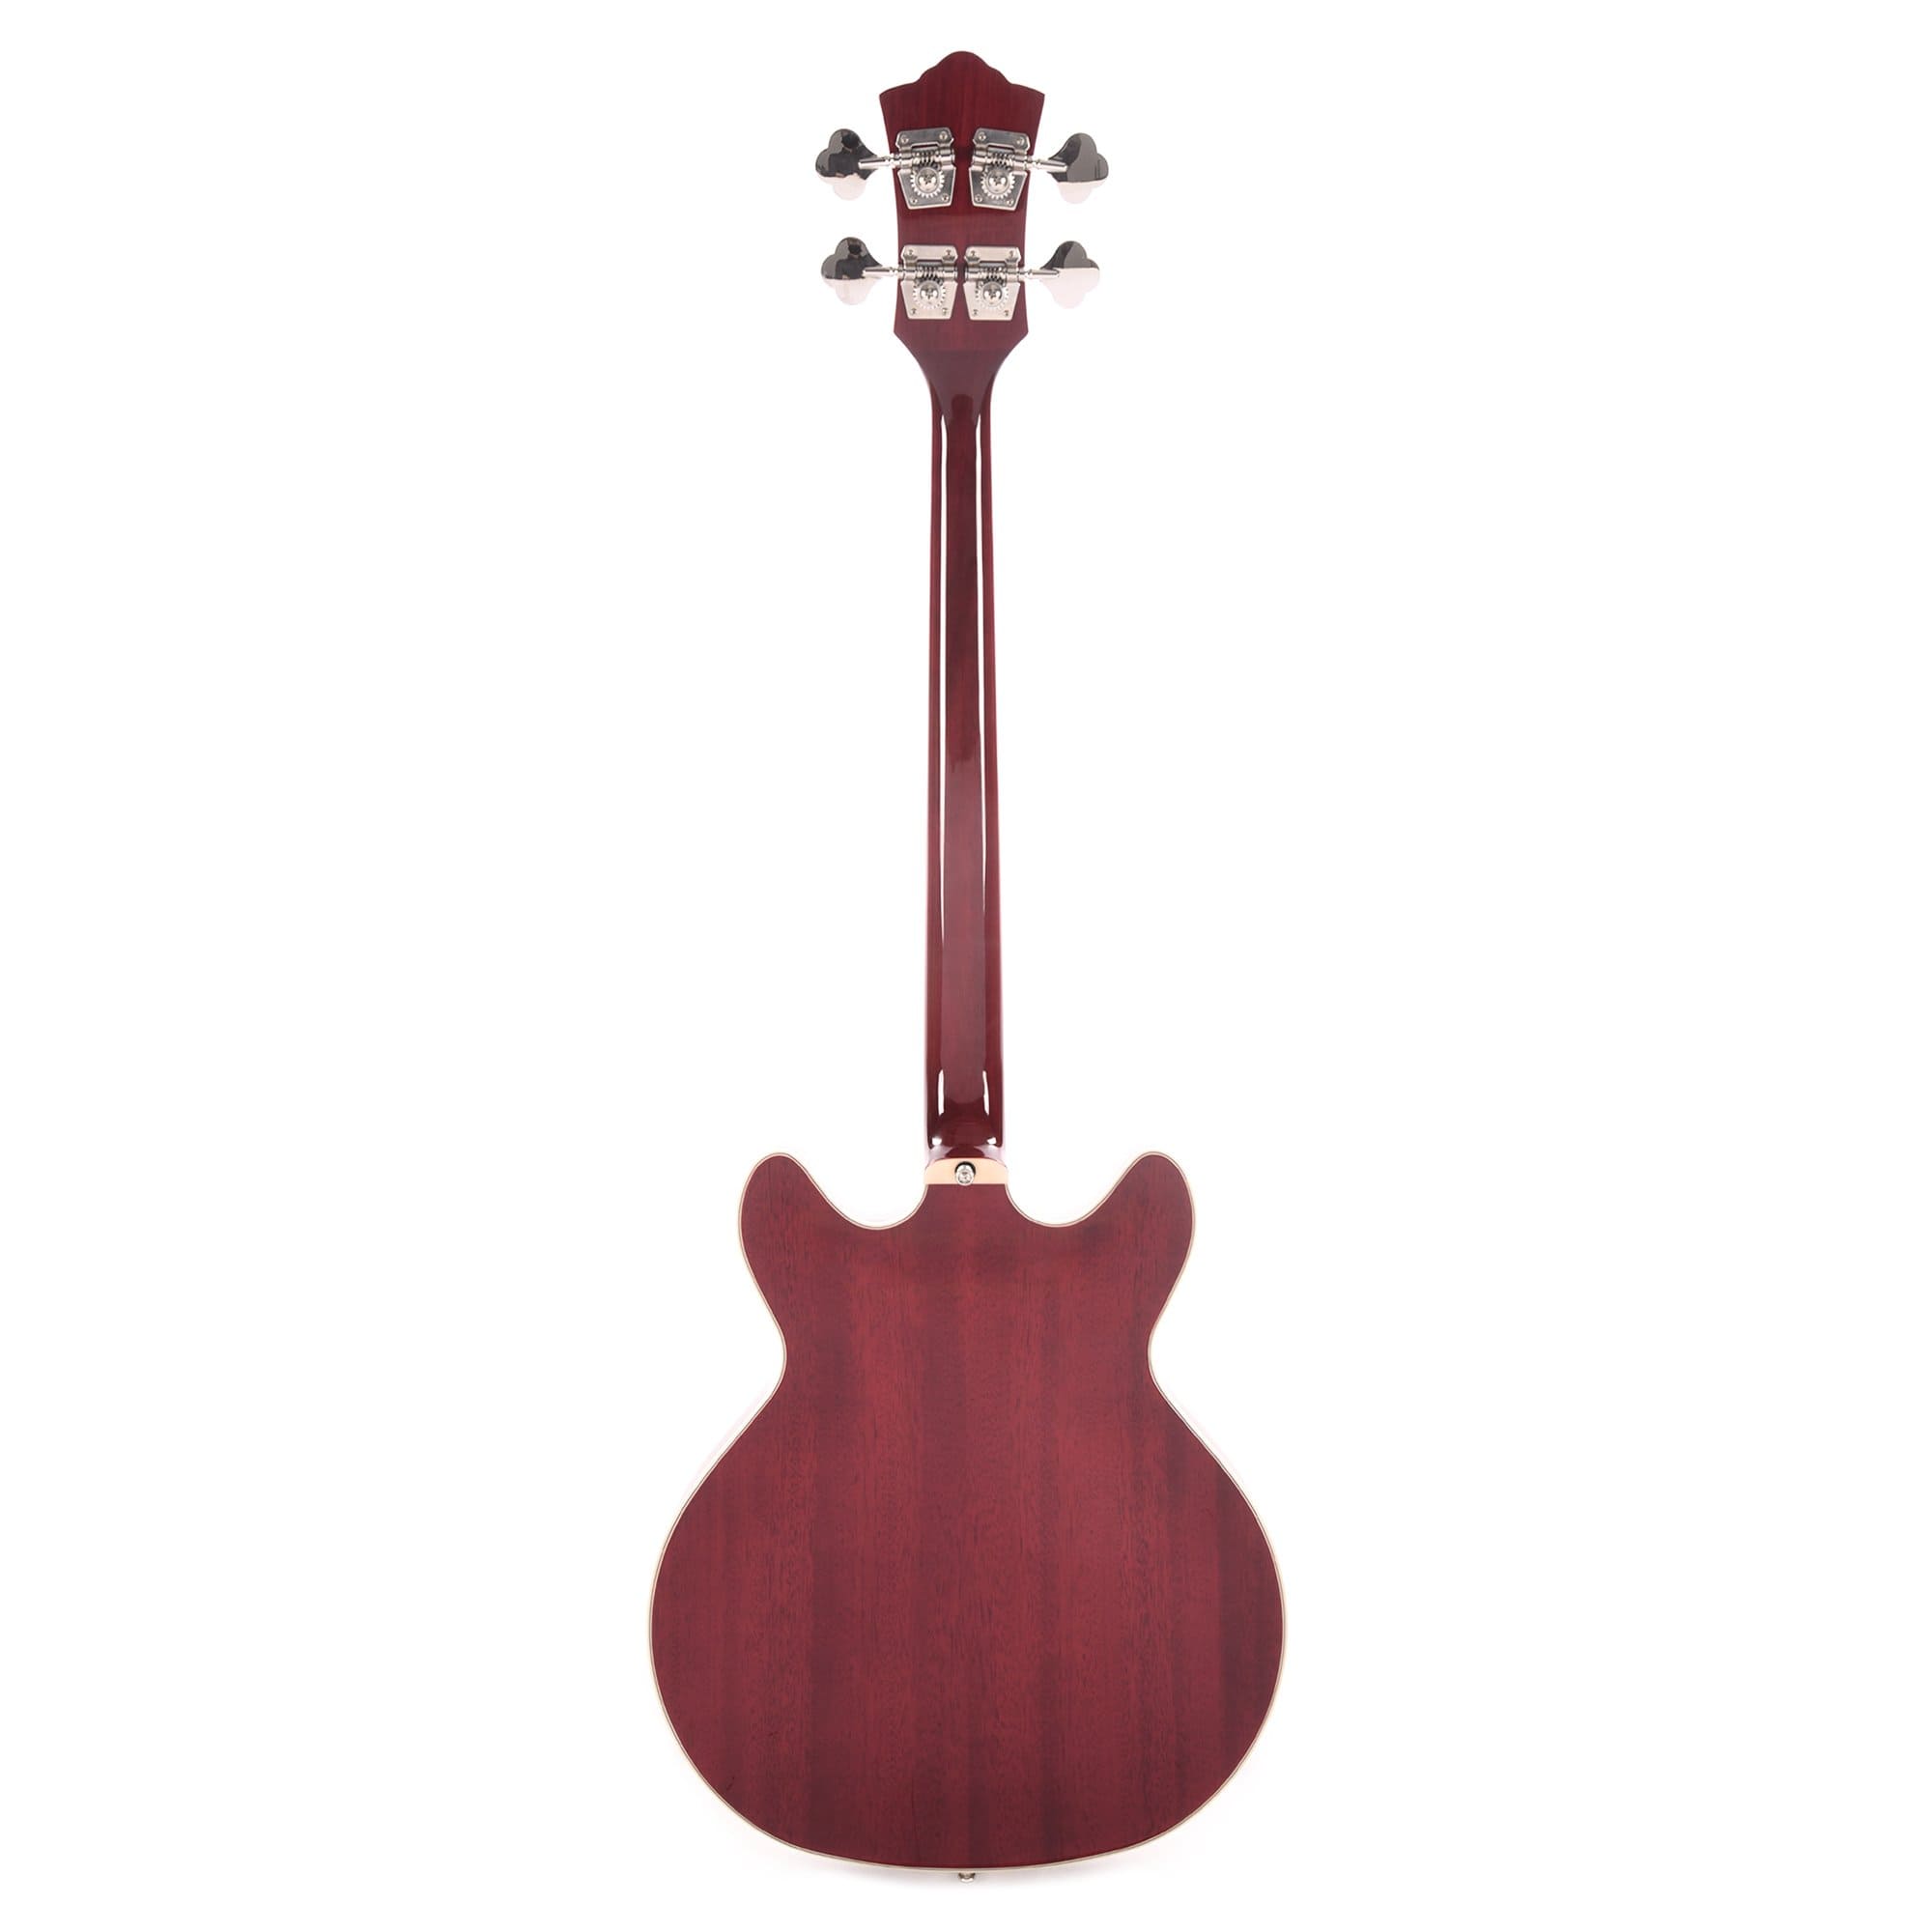 Guild Starfire I Bass DC Cherry Red LEFTY Bass Guitars / Left-Handed